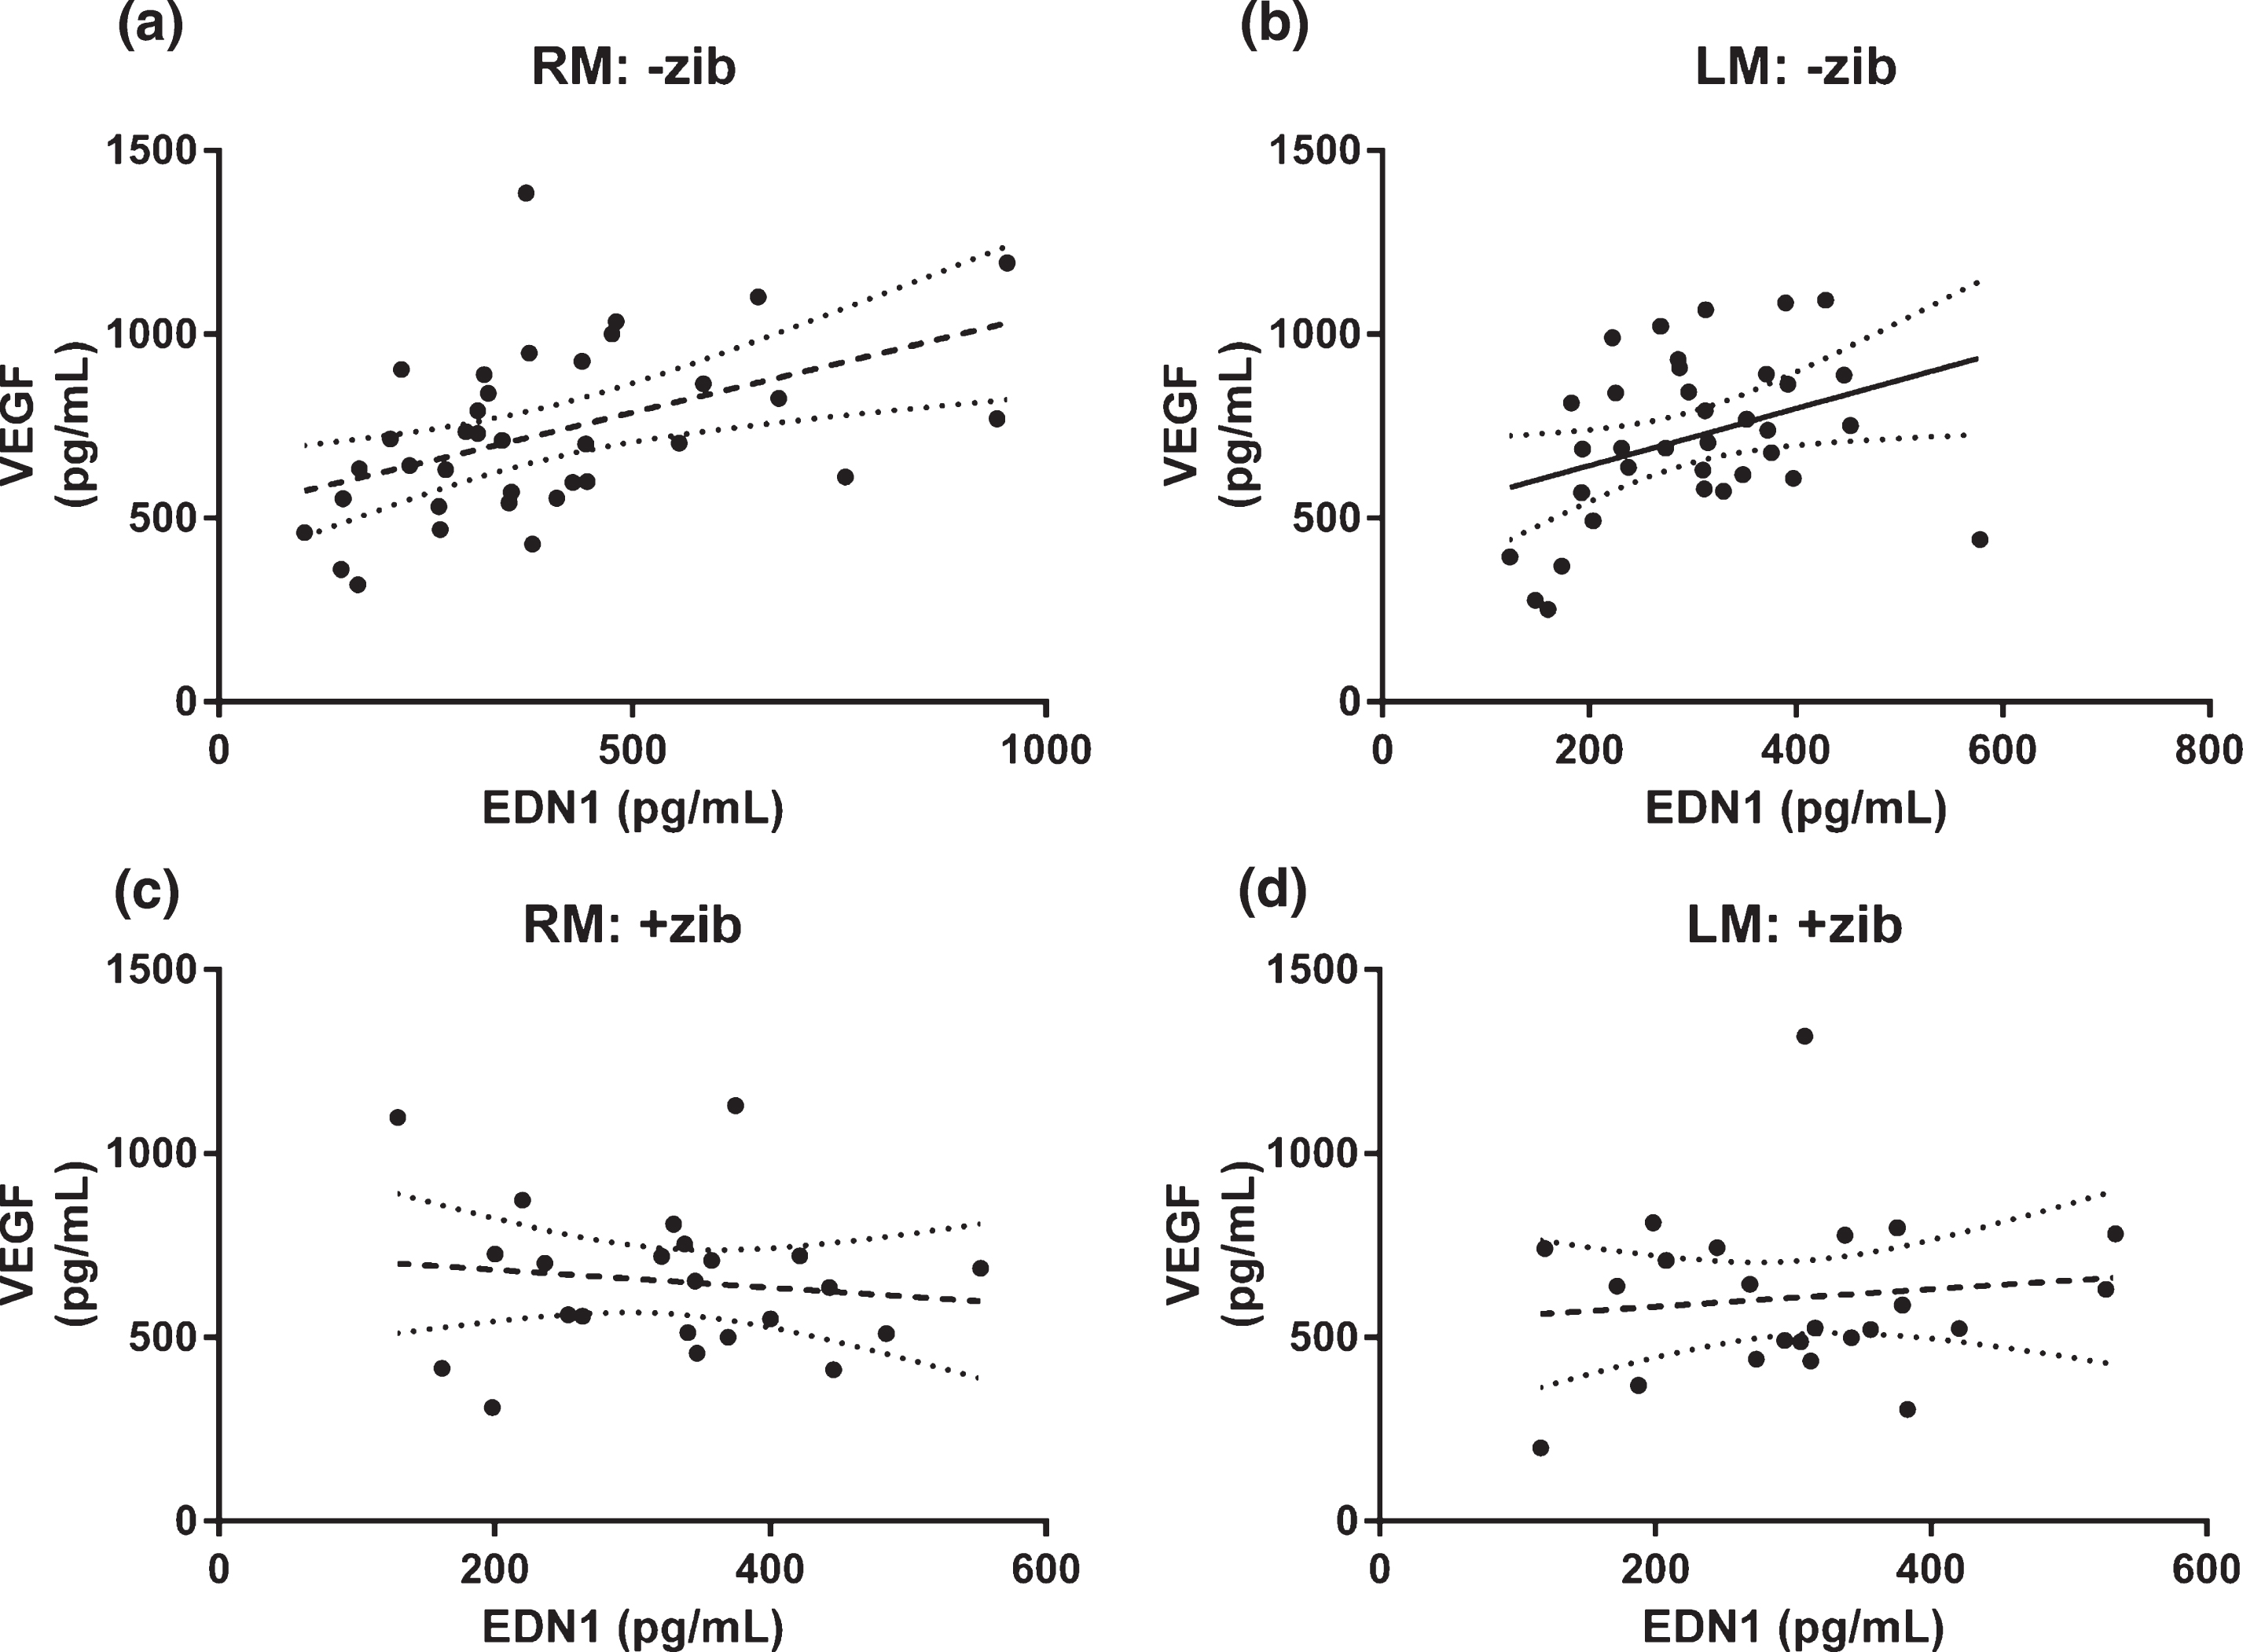 Relationship between EDN1 and VEGF in brain tissue homogenates. Relationship between EDN1 and VEGF in left middle (LM) and right middle (RM; infusion site) homogenates. Tissue concentrations of VEGF versus EDN1 in animals given Zibotentan (+zib; n = 36) in (a) RM and (b) LM and those without Zibotentan (-zib; n = 23) for (c) RM and (d) LM samples, showing best-fit (solid) regression line + 95% CI (dotted) in all animals. There was a significant positive correlation between VEGF and EDN1 in both (a) RM and (b) LM homogenates on analysis of those animals not given Zibotentan (RM r2 = 0.470, p = 0.0038; LM r2 = 0.128, p = 0.0320) but there was no correlation between VEGF and EDN1 in either cerebral hemisphere in the Zibotentan-treated animals (RM r2 = 0.0168, p = 0.556; LM r2 = 0.0131, p = 0.604).